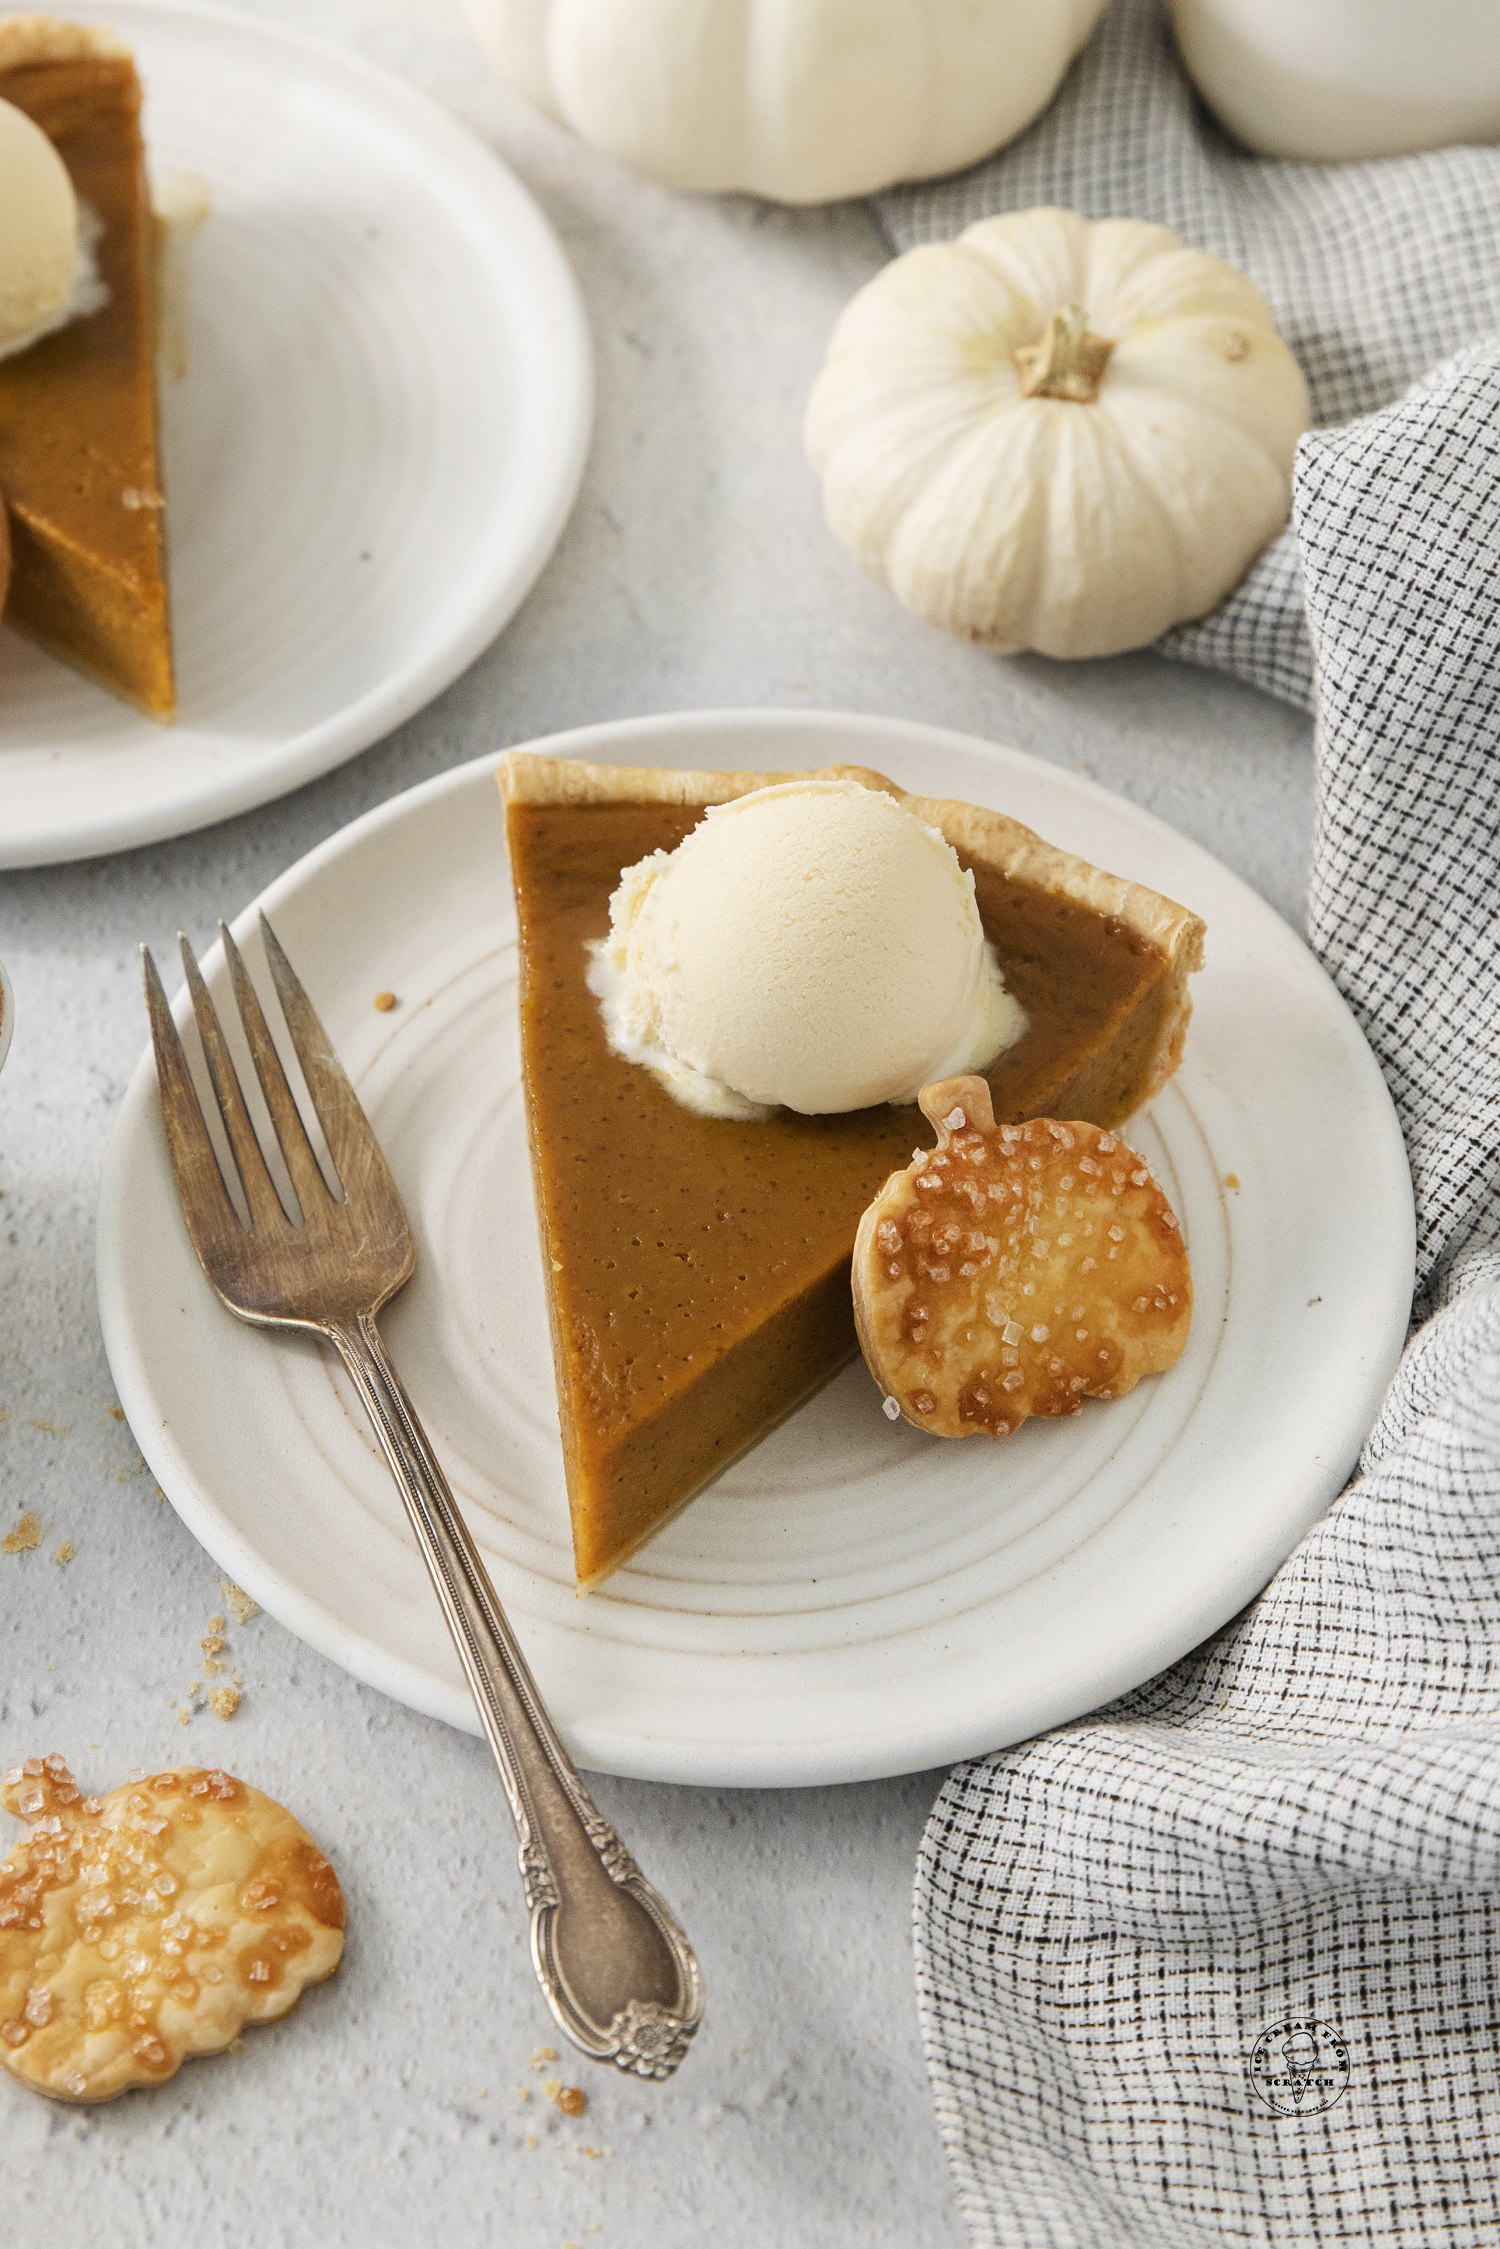 a slice of pumpkin pie with vanilla ice cream on a plate with a fork.